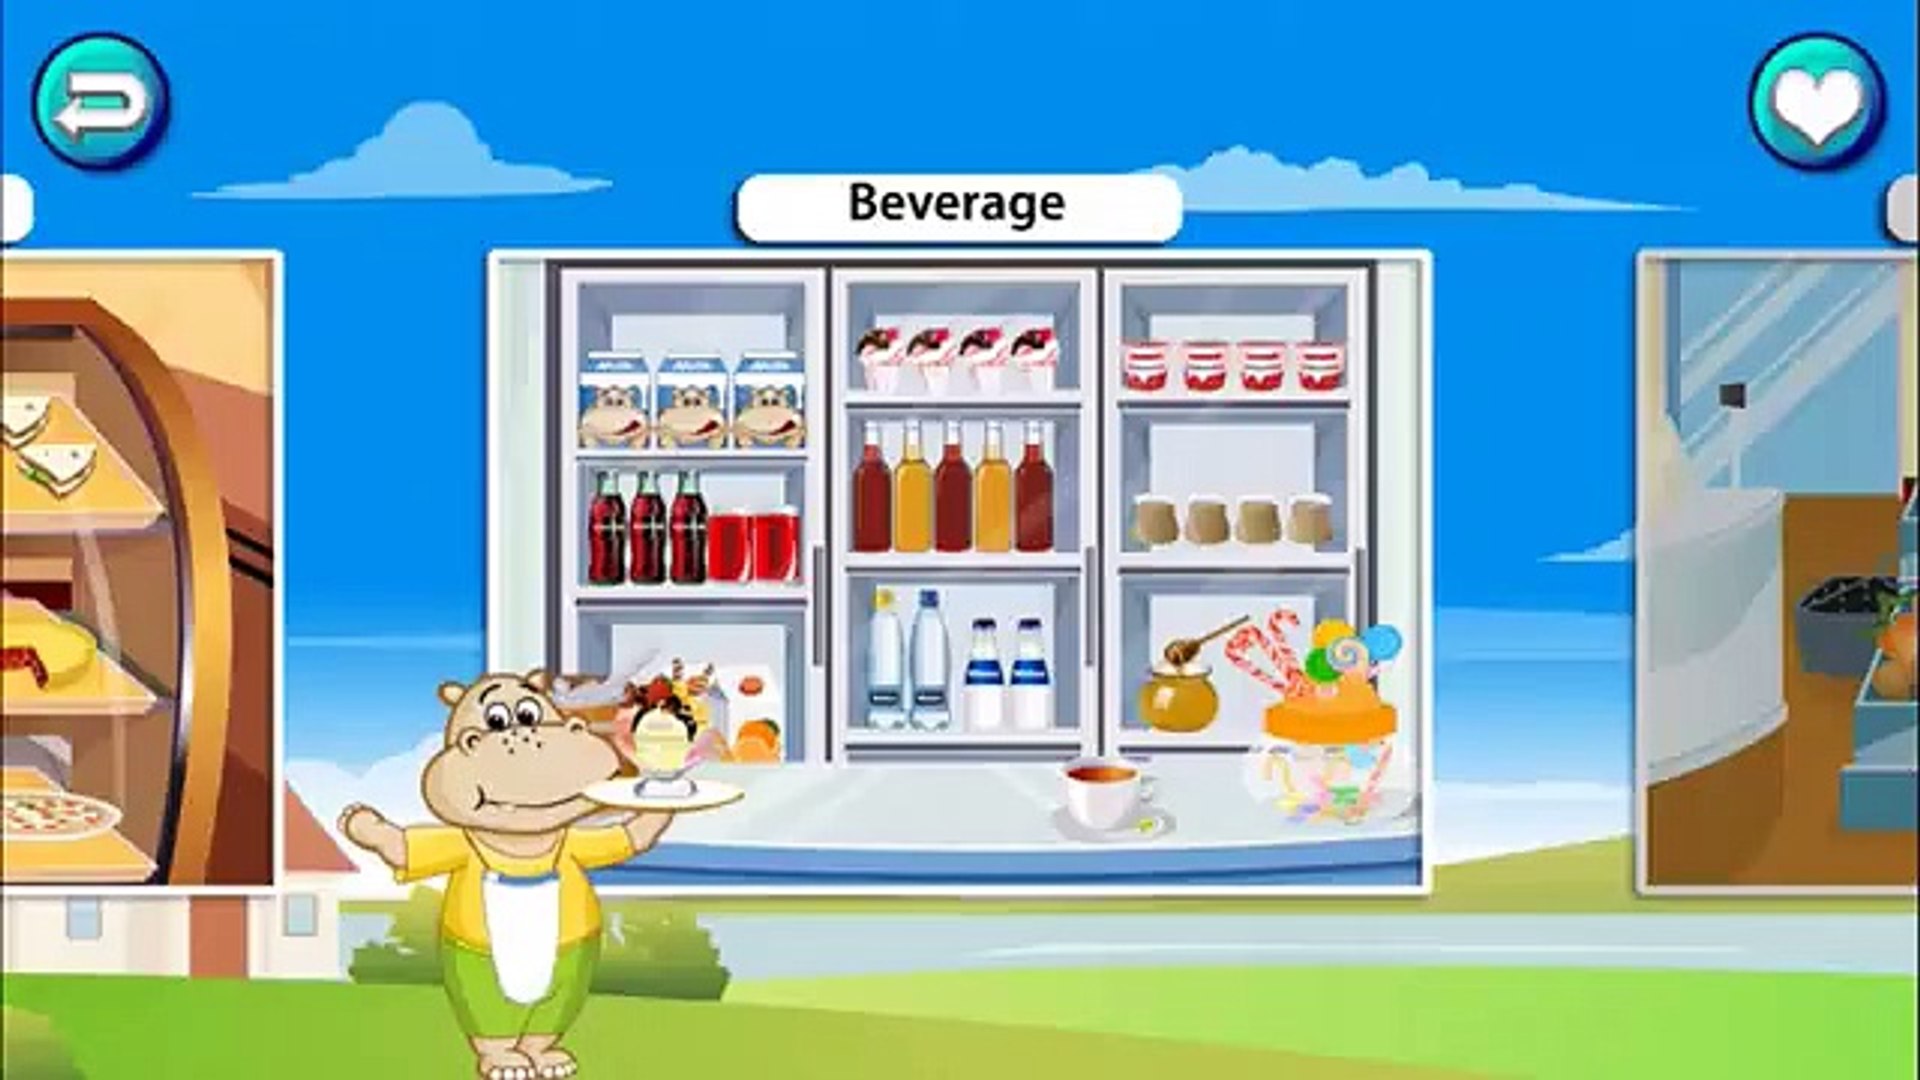 SHAPE PUZZLE-KIDS EDUCATIONAL WORD LEARNING GAME APP WITH HIPPO TEACHING US  BEVERAGE AND SOME SWEETS.mp4 - video Dailymotion